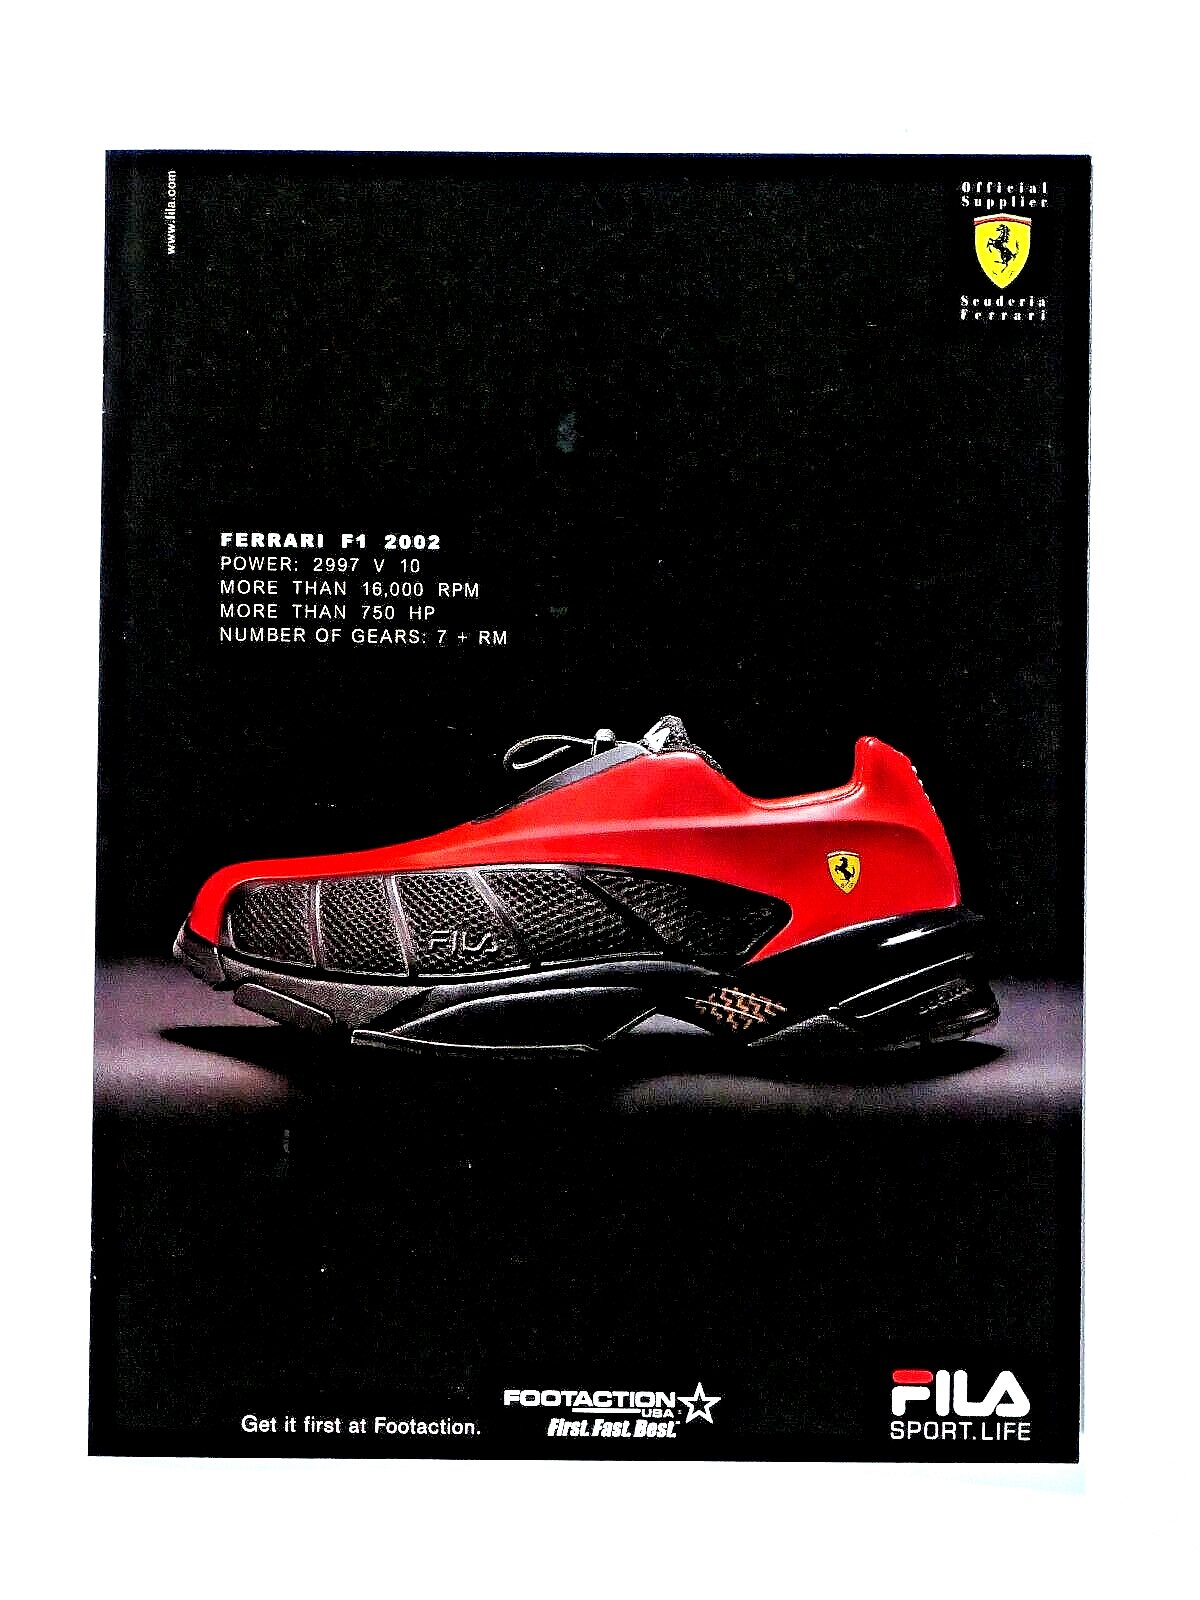 Booth noodzaak Penelope Vincenzo Landino on Twitter: "The partnership fizzled after FILA took over  rights to supply Ferrari's footwear in 2002. https://t.co/axIXSrGXMB" /  Twitter